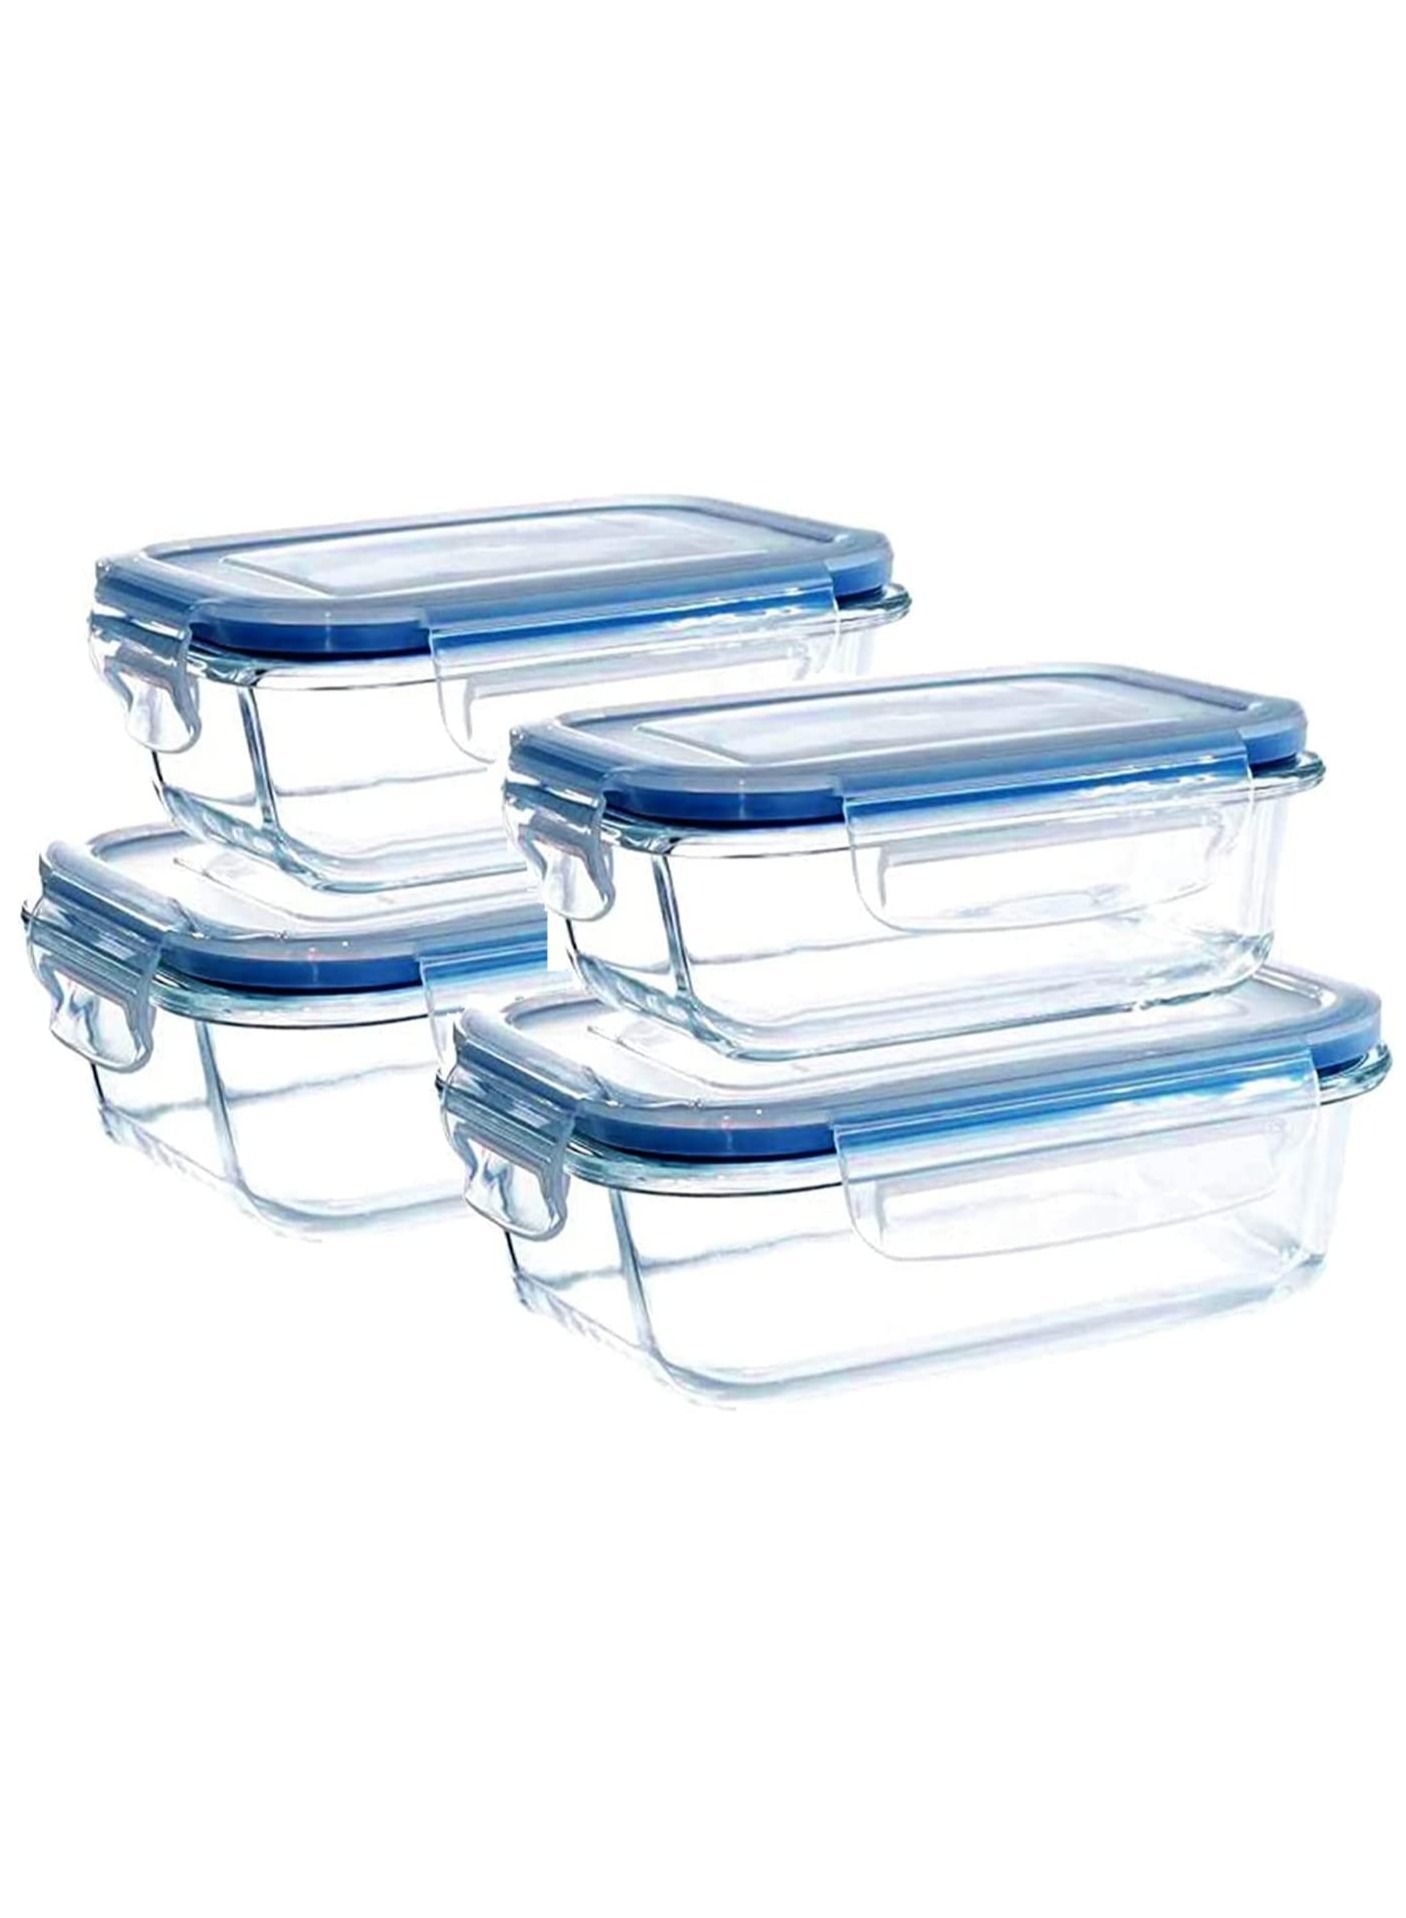 [3Diamonds] Glass Containers BPA-Free Locking lids Food Storage Container 100% Leakproof Glass Lunch Boxes, Freezer Storage container with Lids Airtight, Glass Food Storage (Set of 4) 